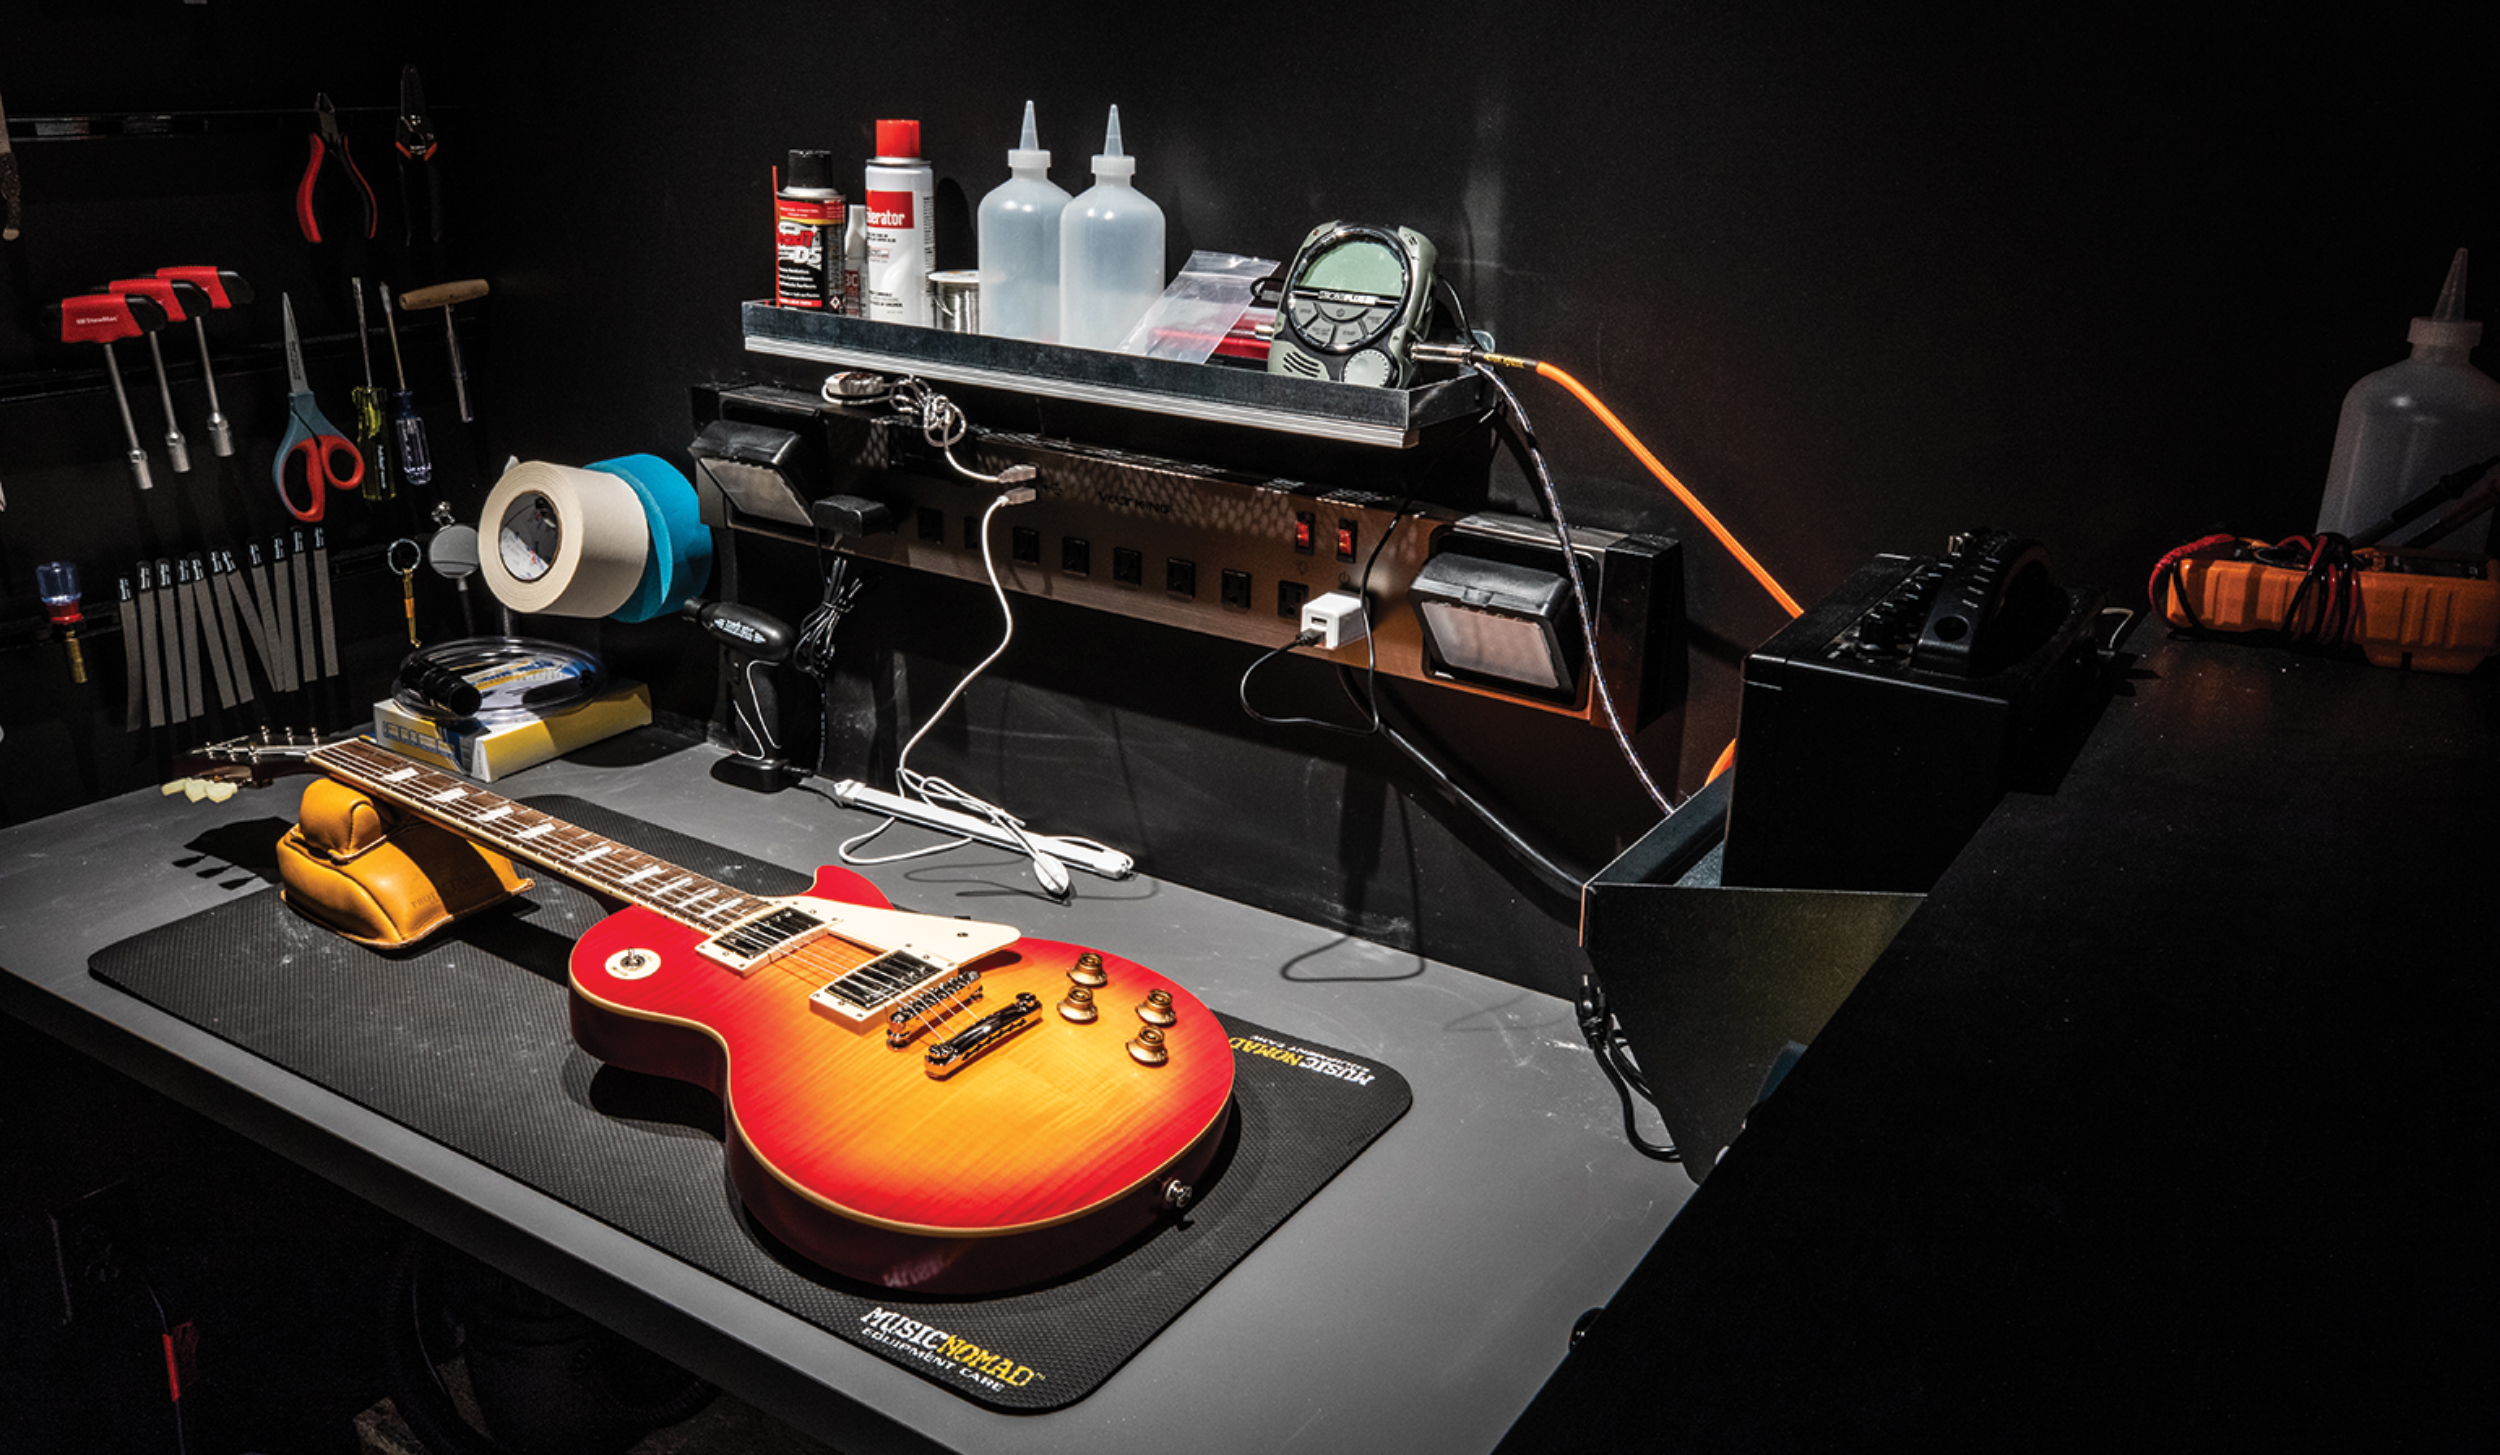 The store includes a repair shop, allowing for guitar maintenance services.